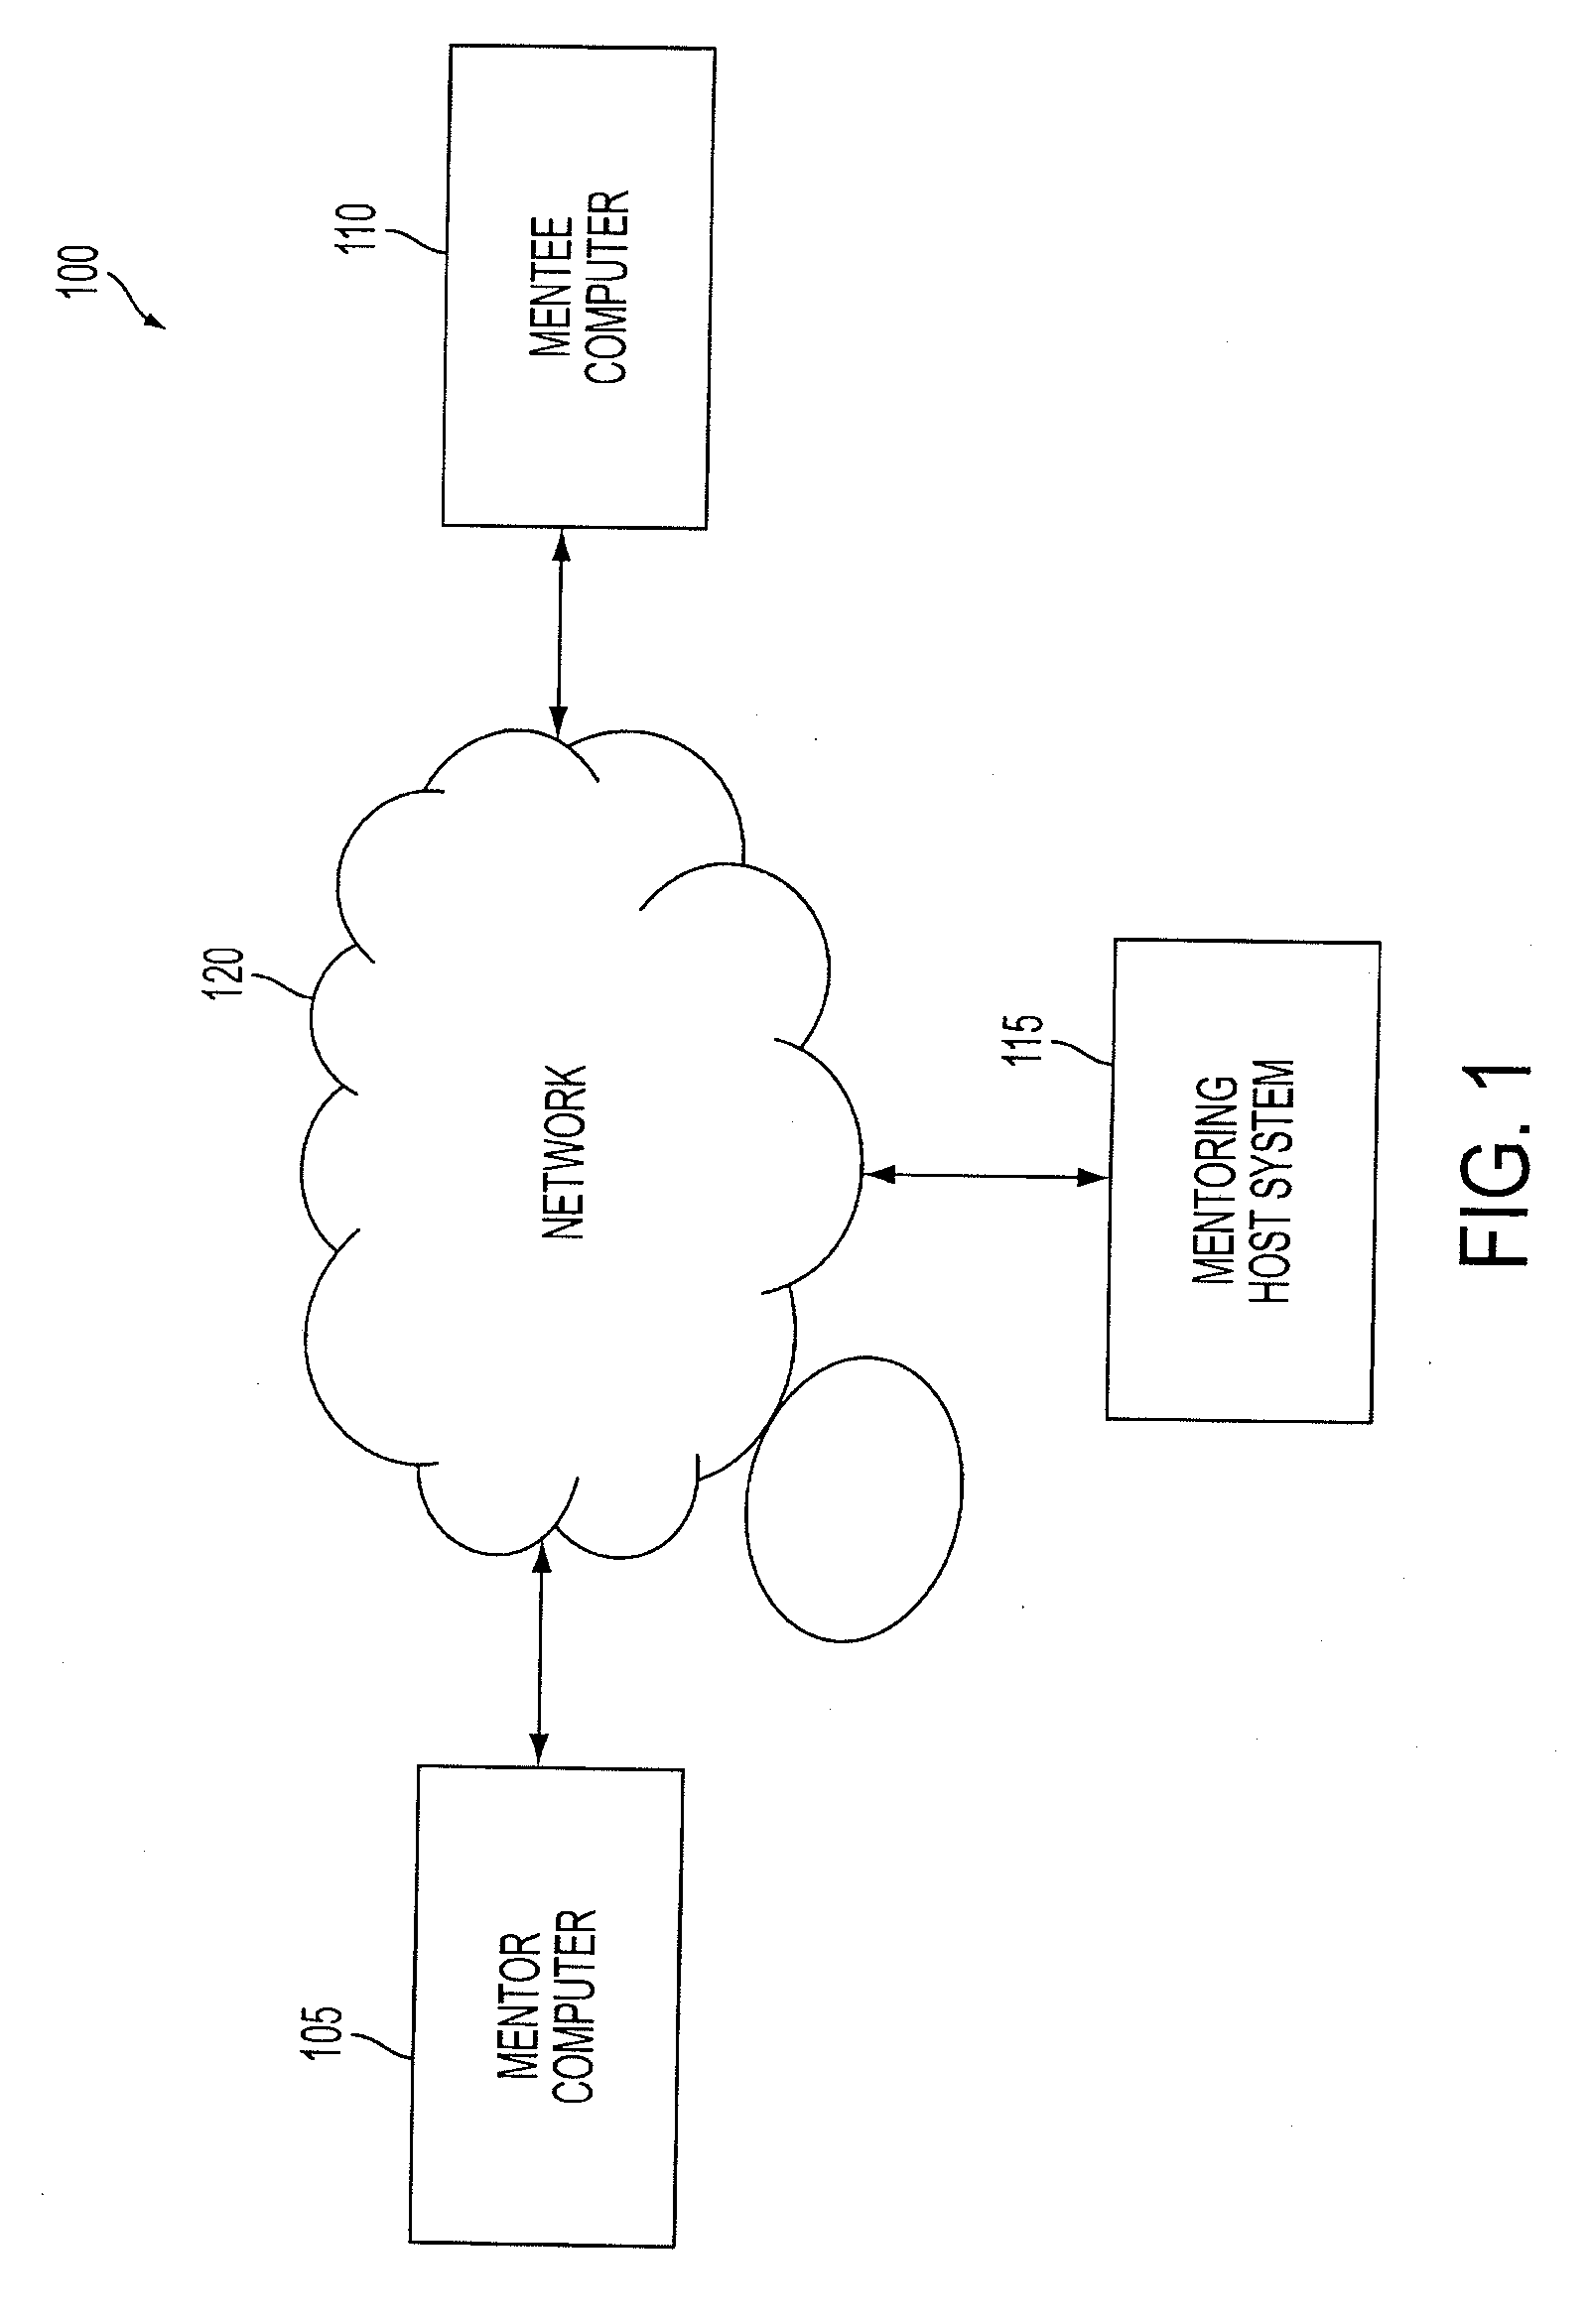 Technology platform and methods for facilitating, cultivating and monitoring mentoring relationships